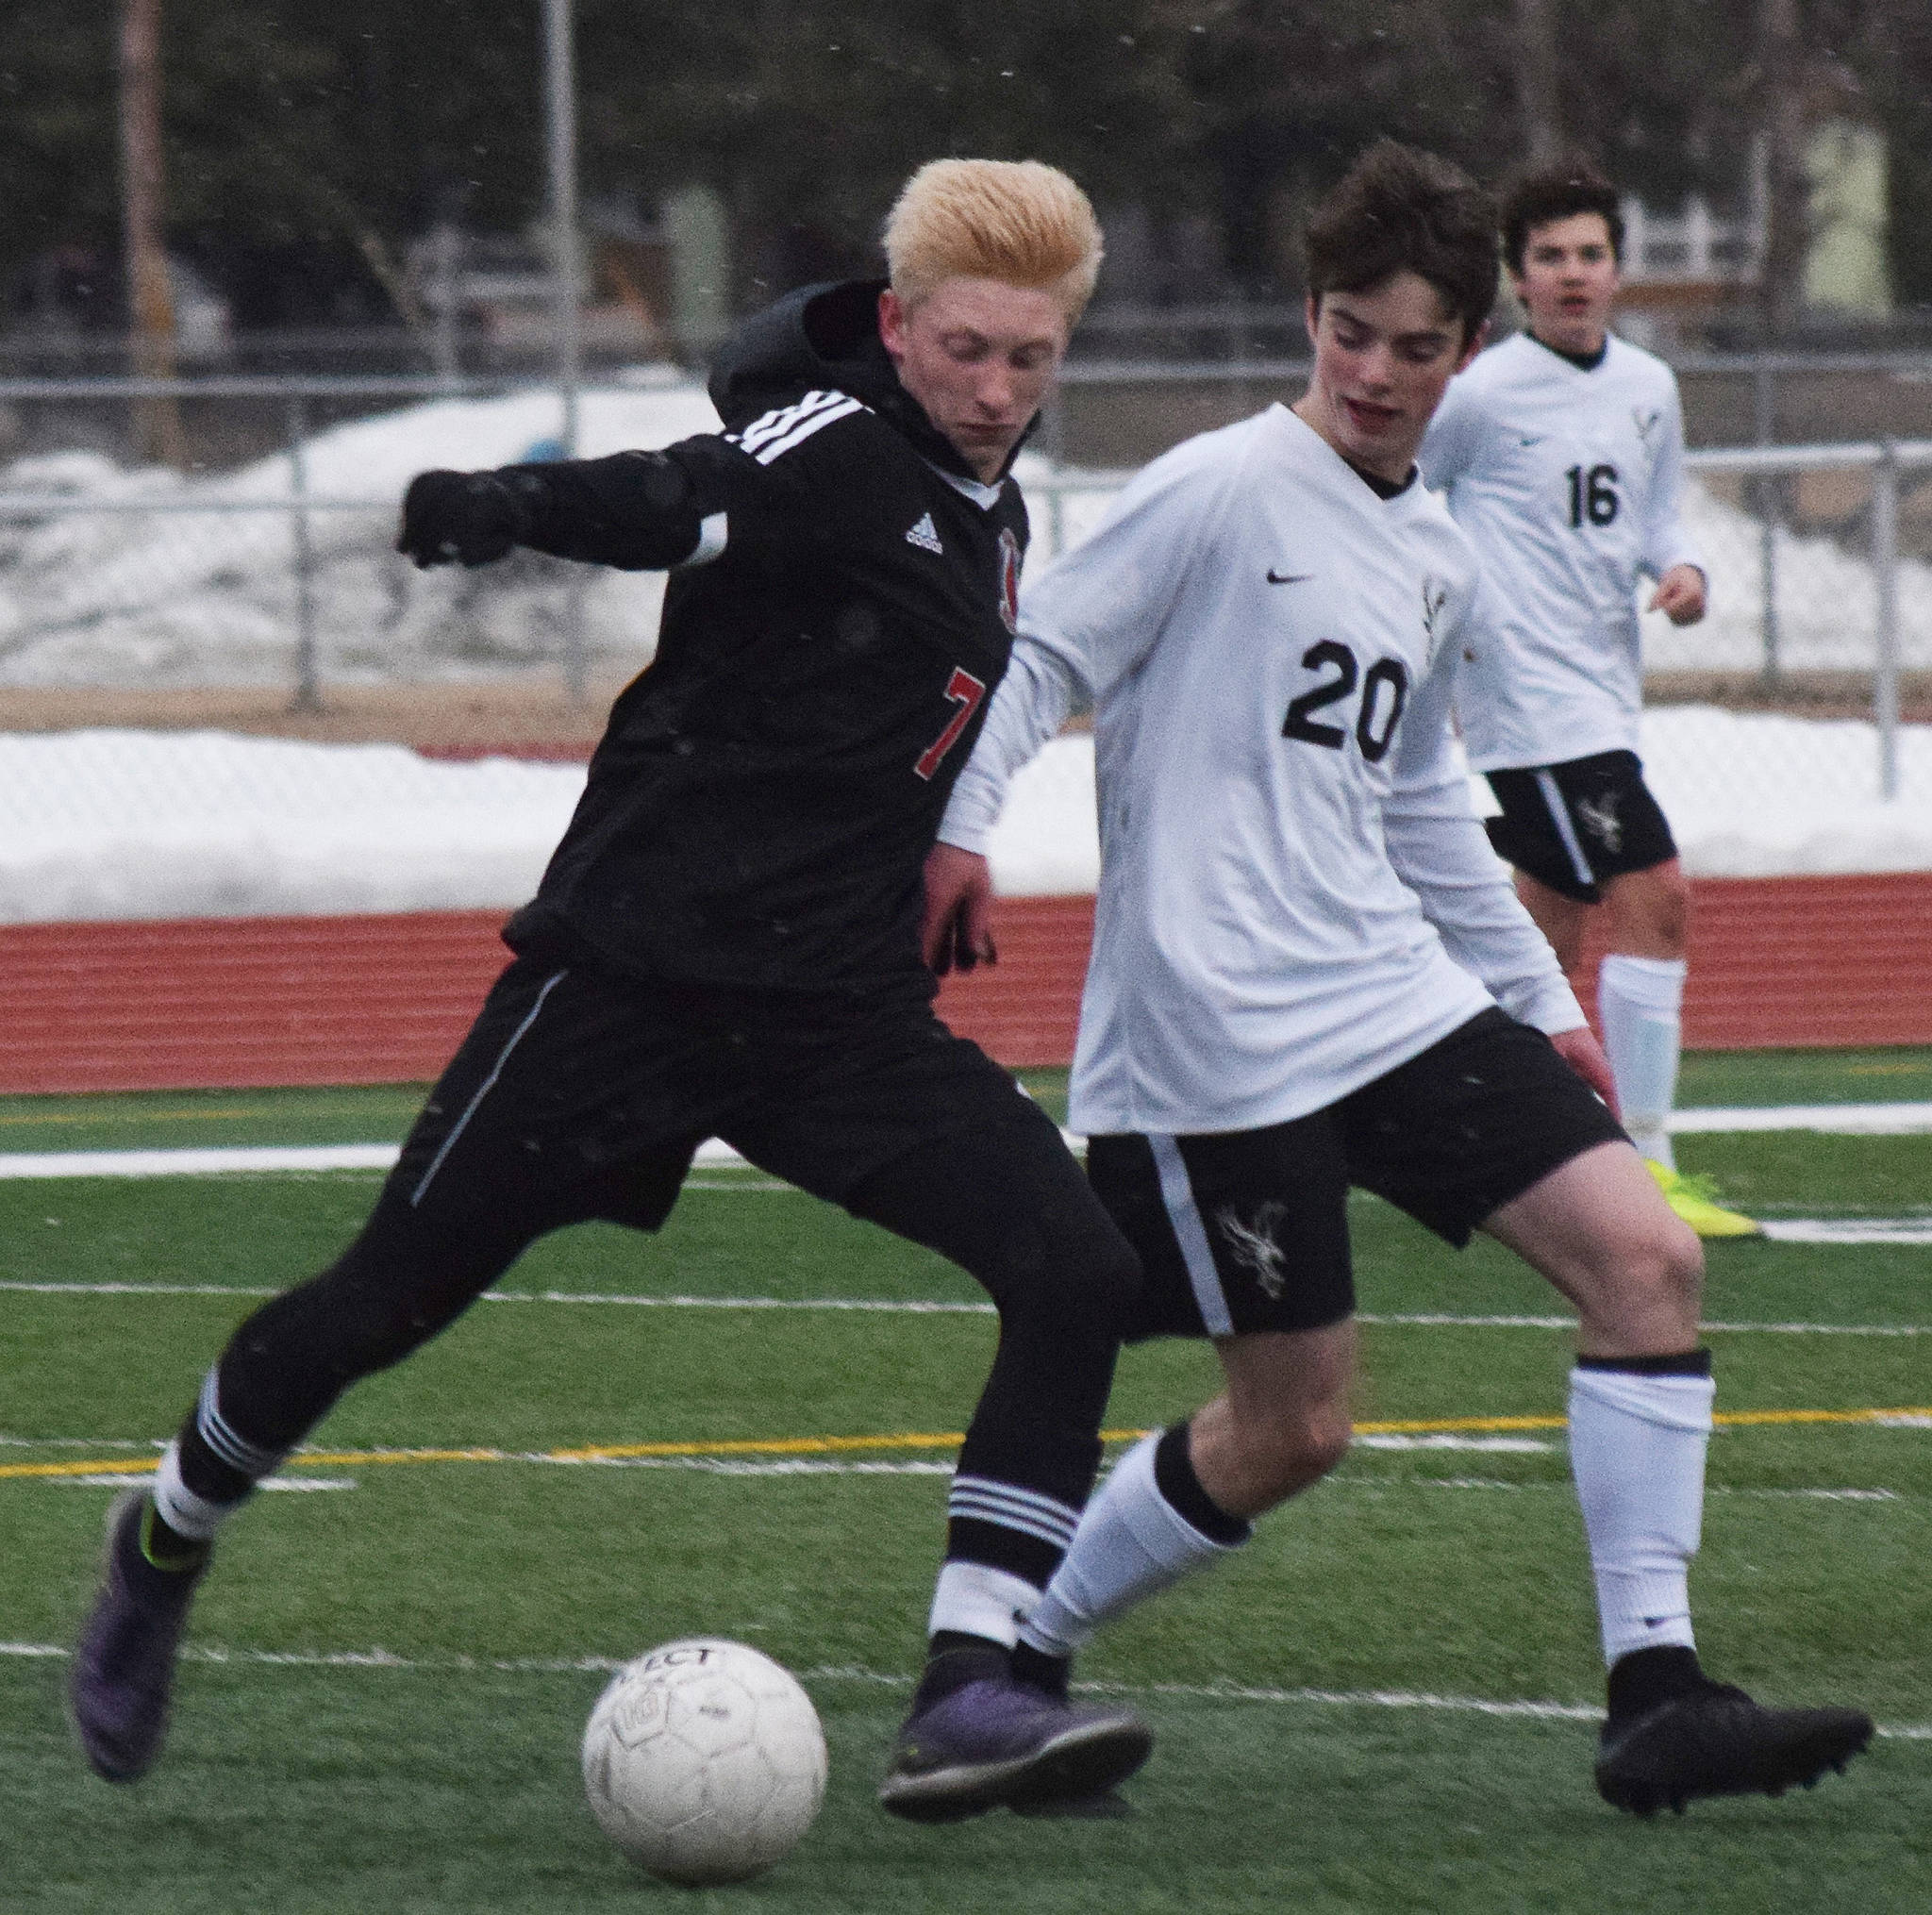 Kenai’s Leif Lofquist (left) battles with West’s Isaac Main Thursday, April 4, 2019, in a nonconference game at Kenai Central High School. (Photo by Joey Klecka/Peninsula Clarion)